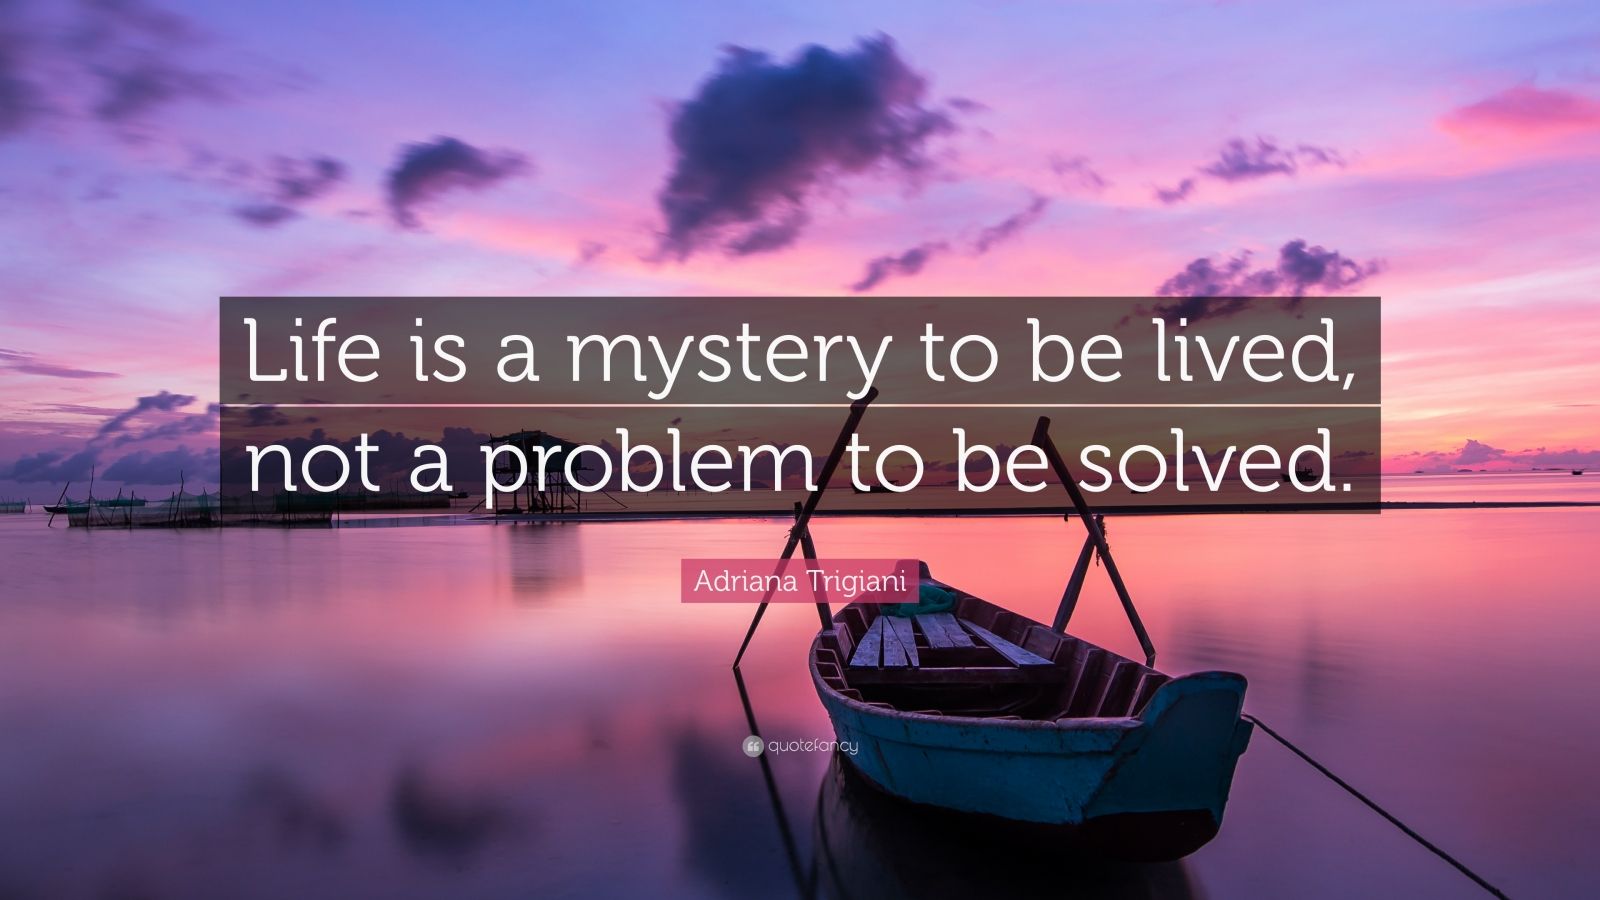 who said life is a mystery to be lived not a problem to be solved